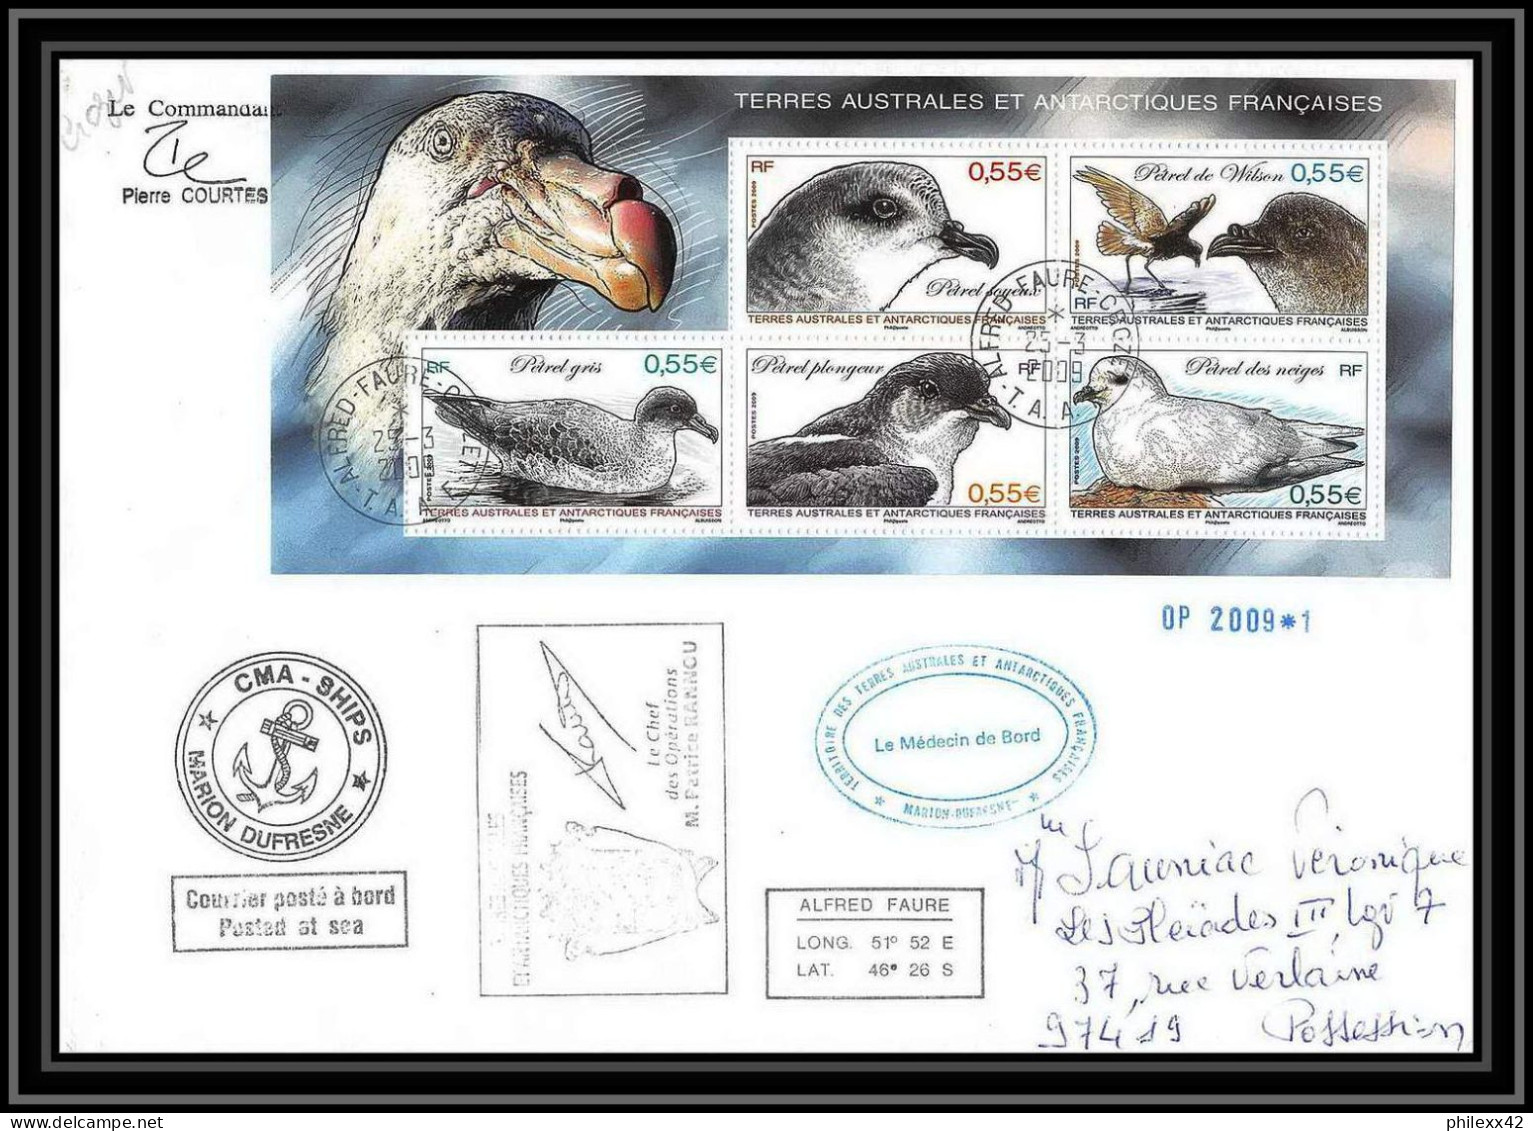 2888 Helilagon Dufresne Signé Signed OP 2009/1 Crozet BLOC N°22 25/3/2009 ANTARCTIC Terres Australes (taaf) Lettre Cover - Helicopters